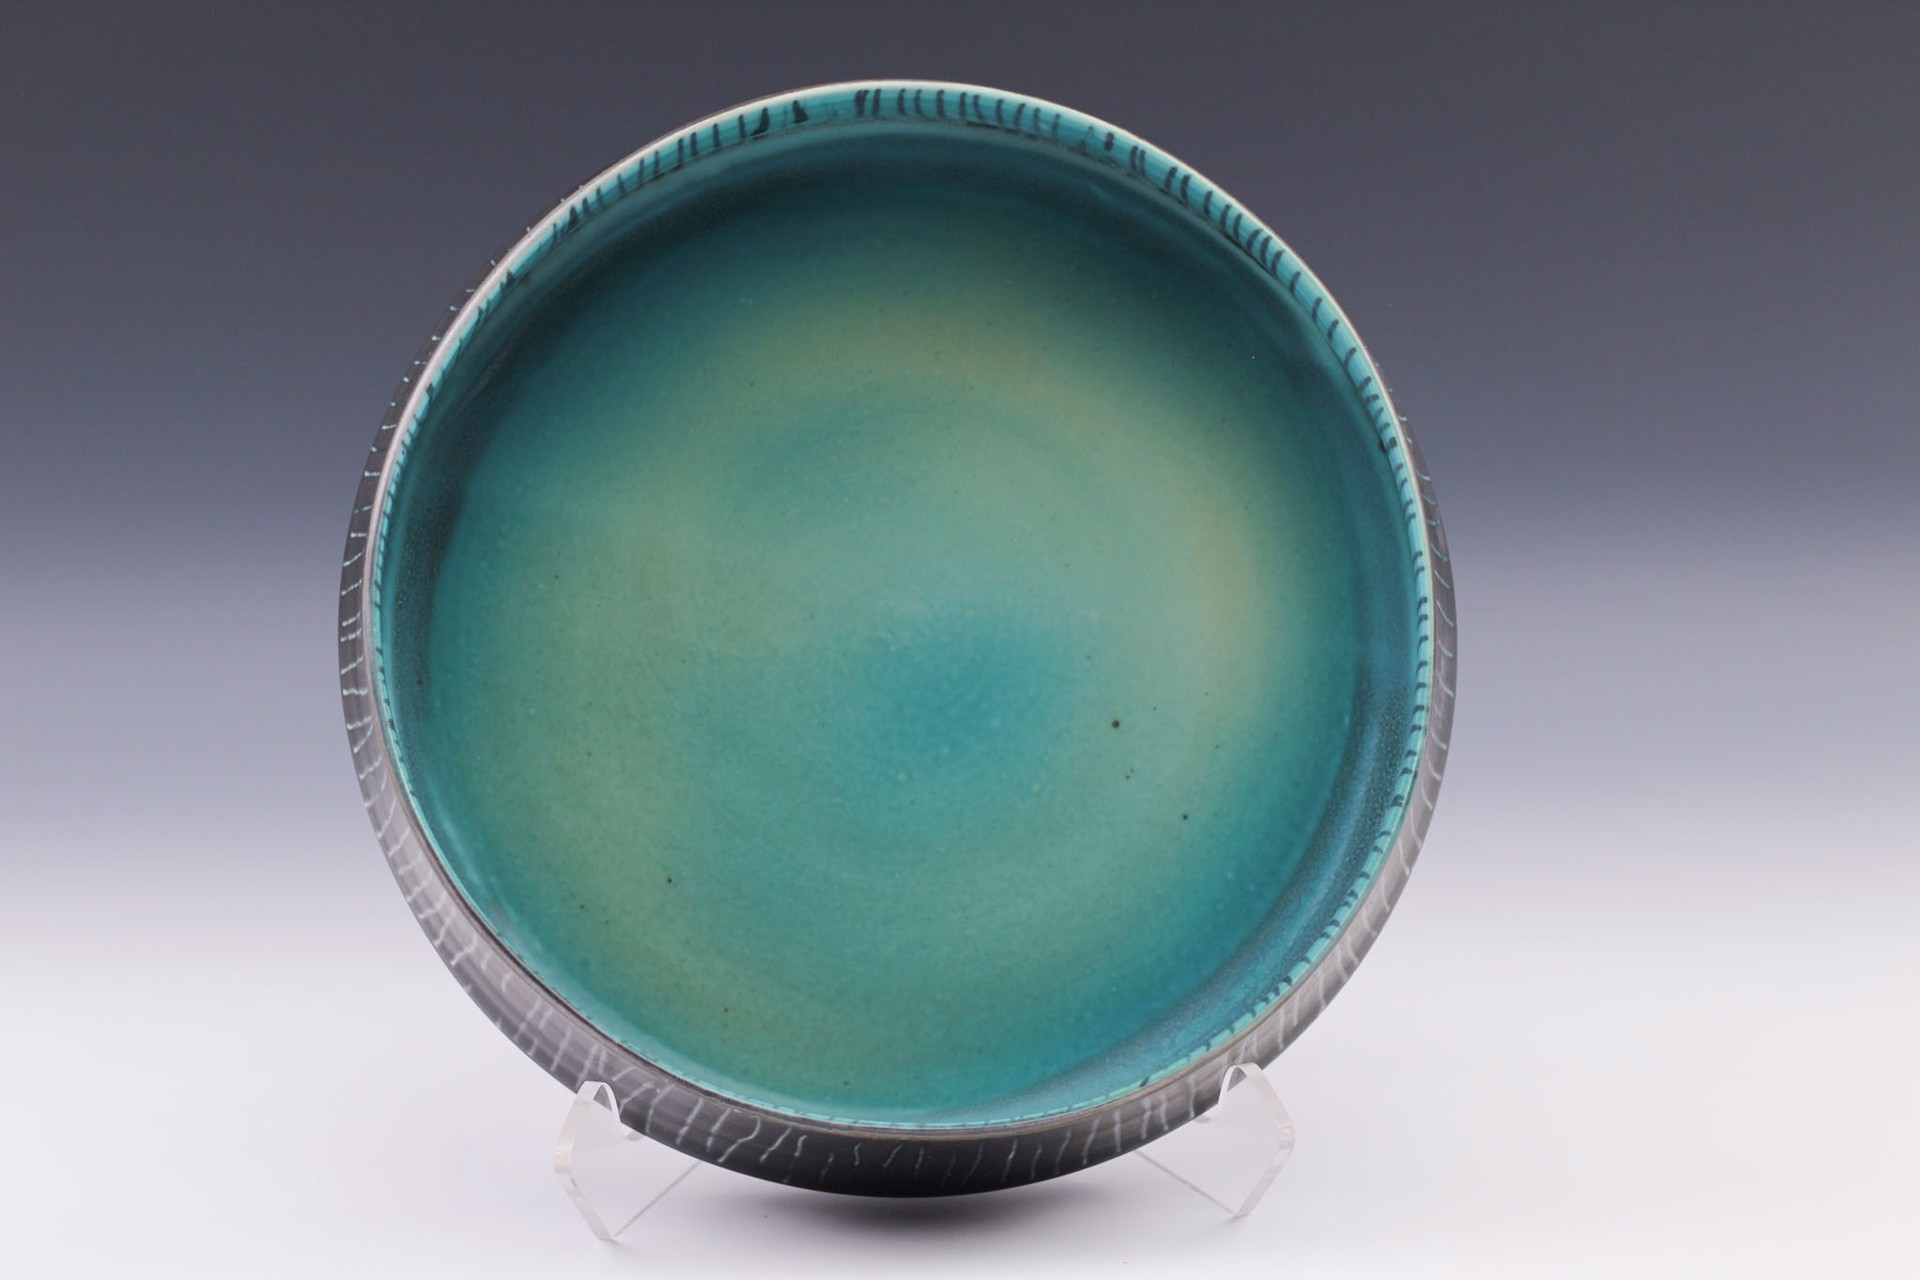 Medium Low Bowl by Delores Fortuna